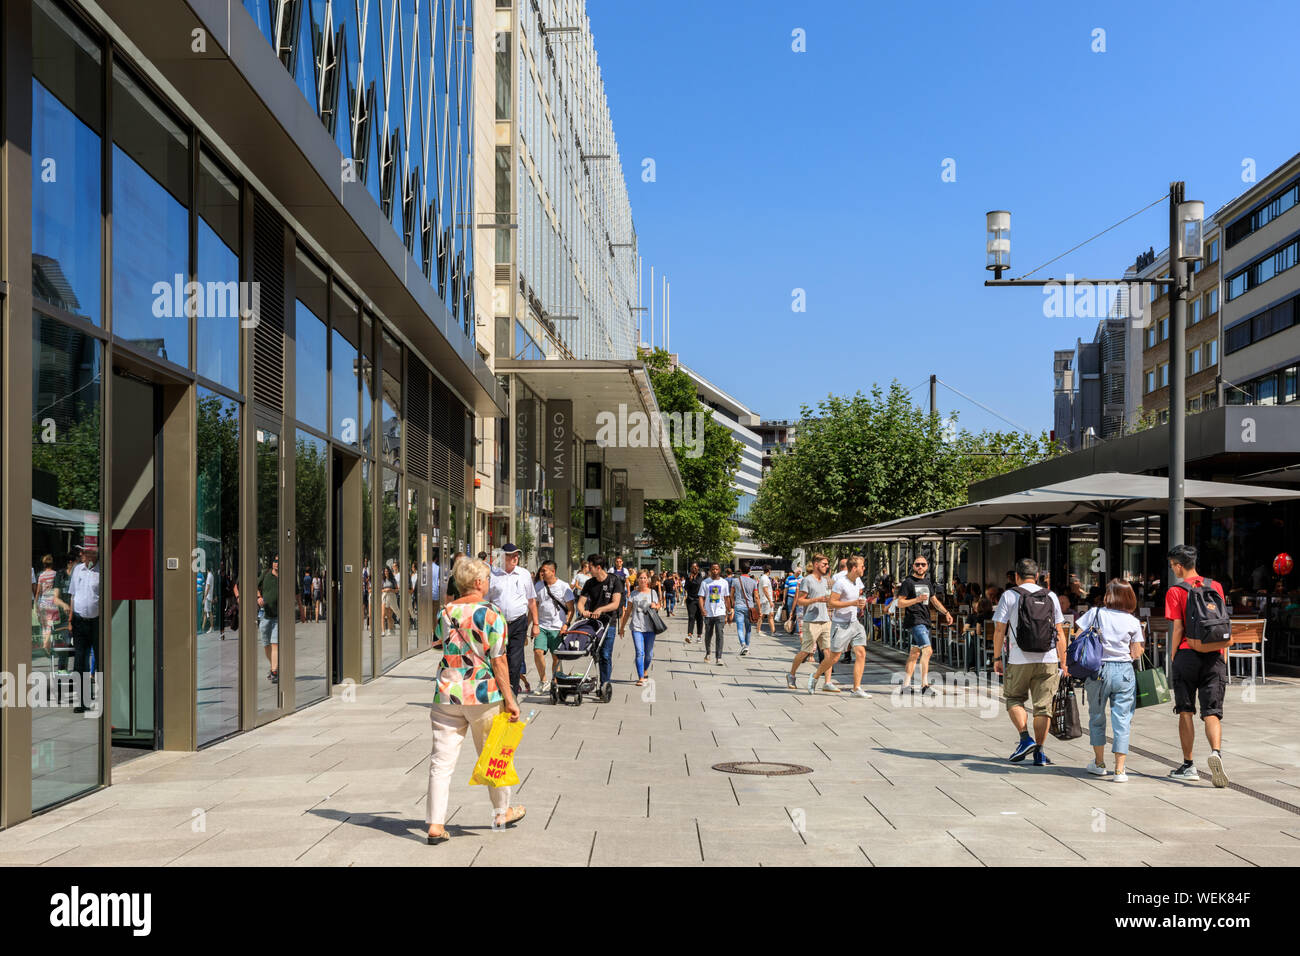 People walking and shopping in the Zeil retail area, Frankfurt am Main, Germany Stock Photo